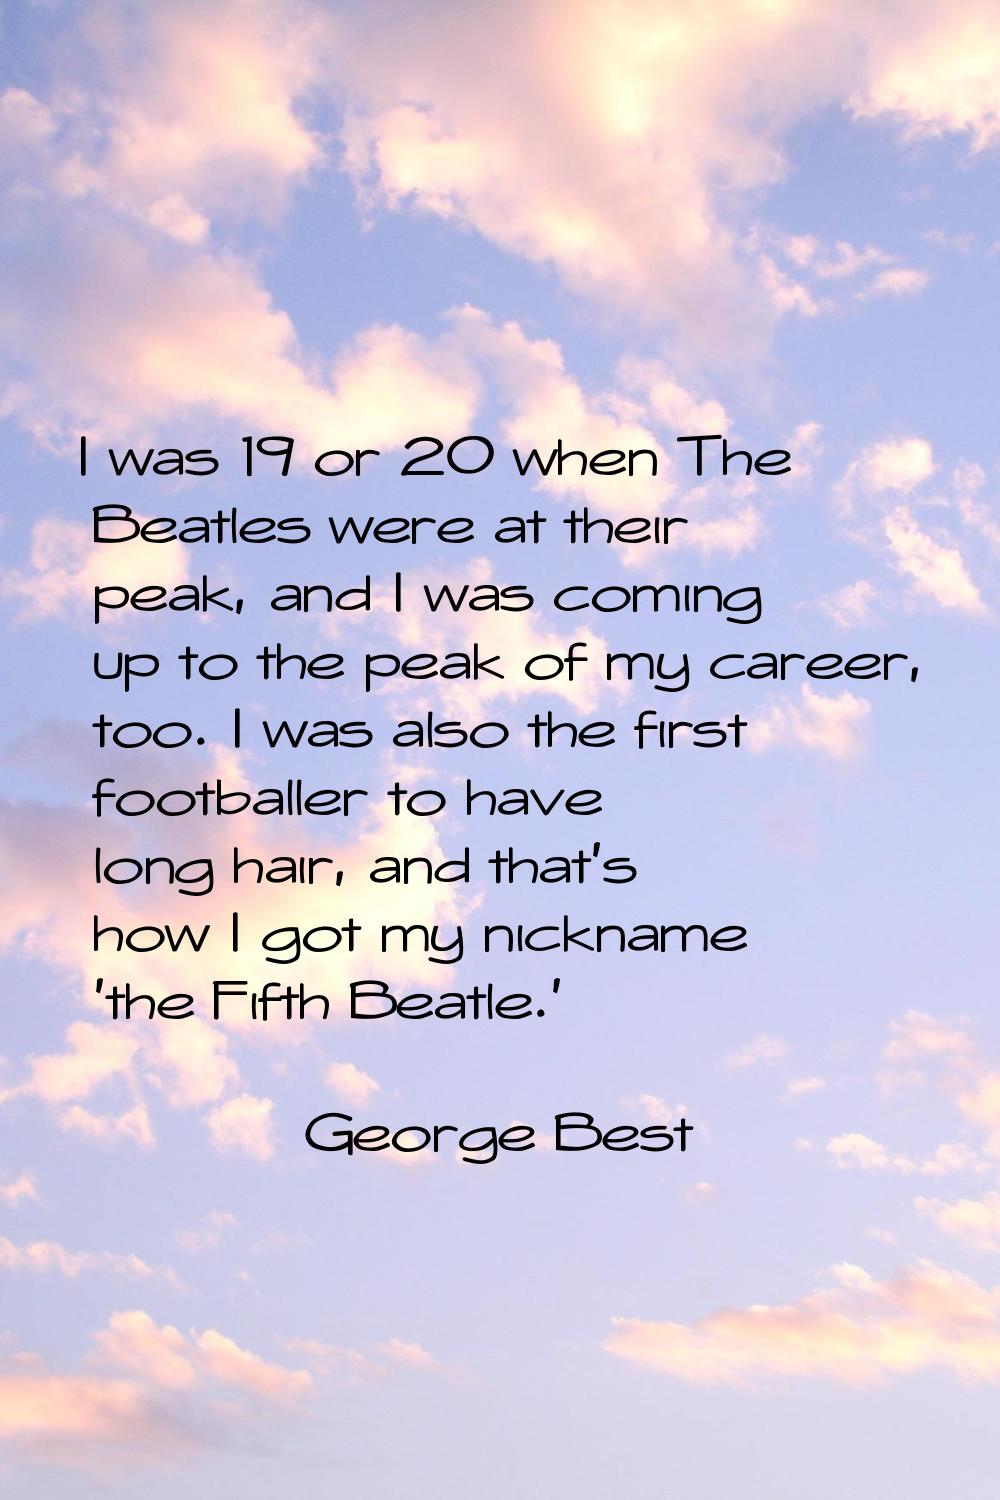 I was 19 or 20 when The Beatles were at their peak, and I was coming up to the peak of my career, t